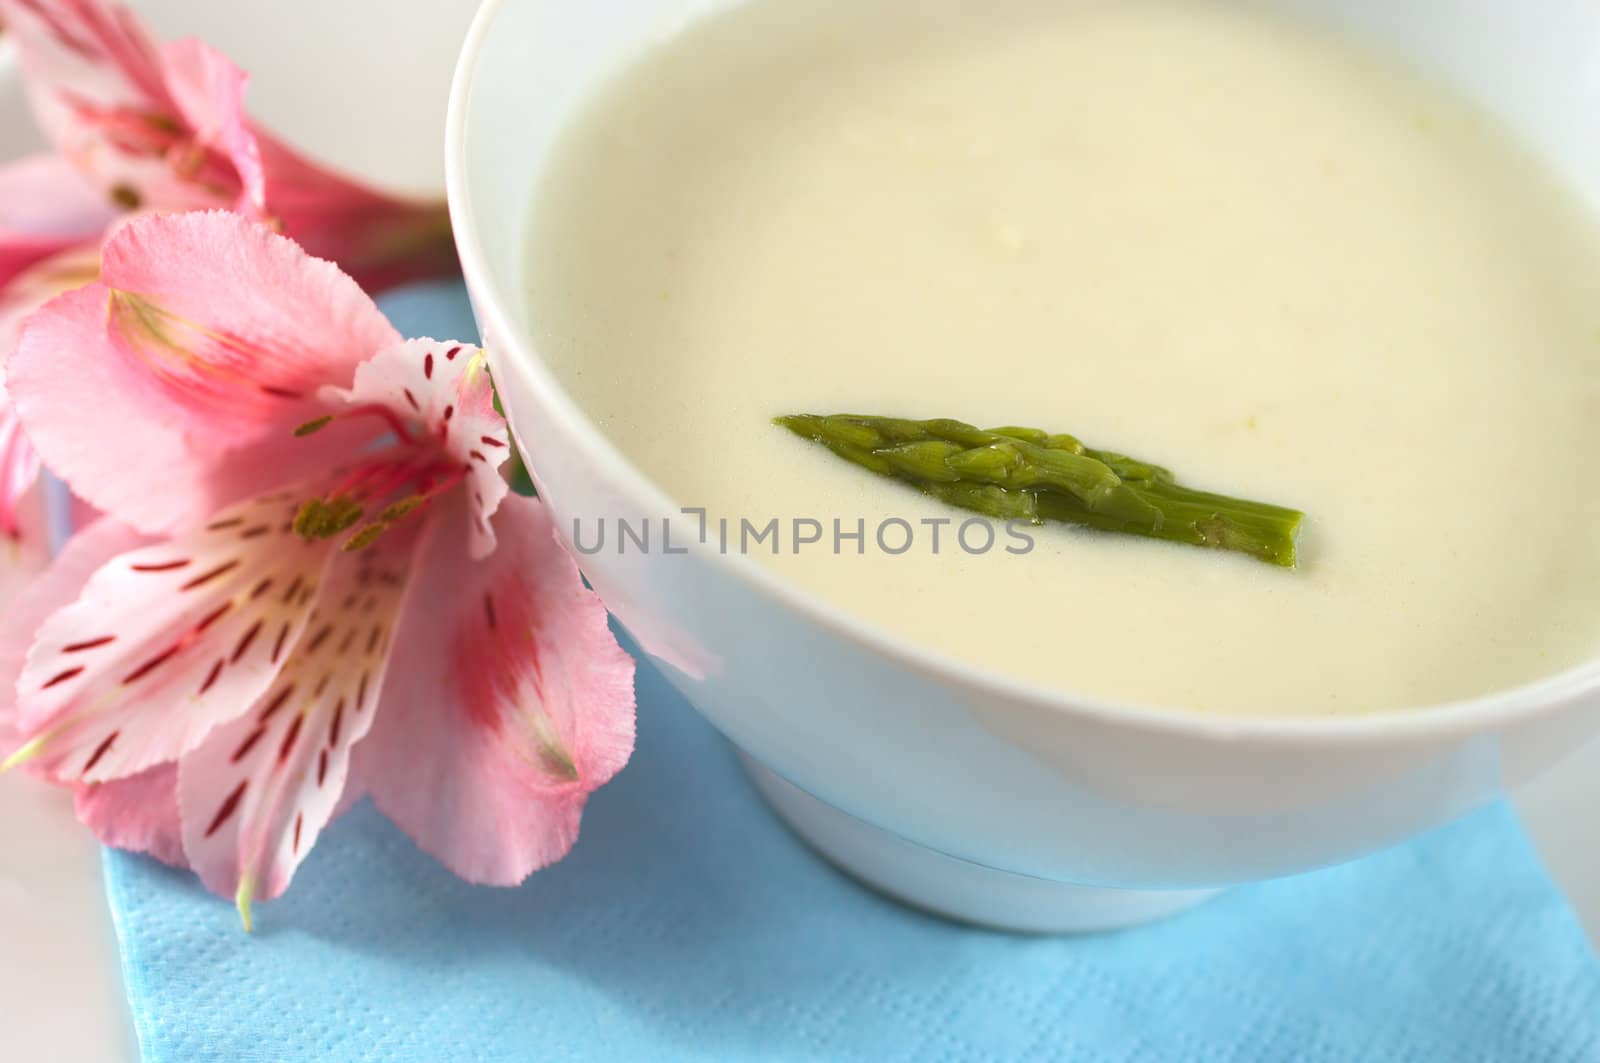 Cream of asparagus with a green asparagus head on top in a white bowl with a pink Inca Lily beside (Very Shallow Depth of Field, Focus on the asparagus head in the soup)